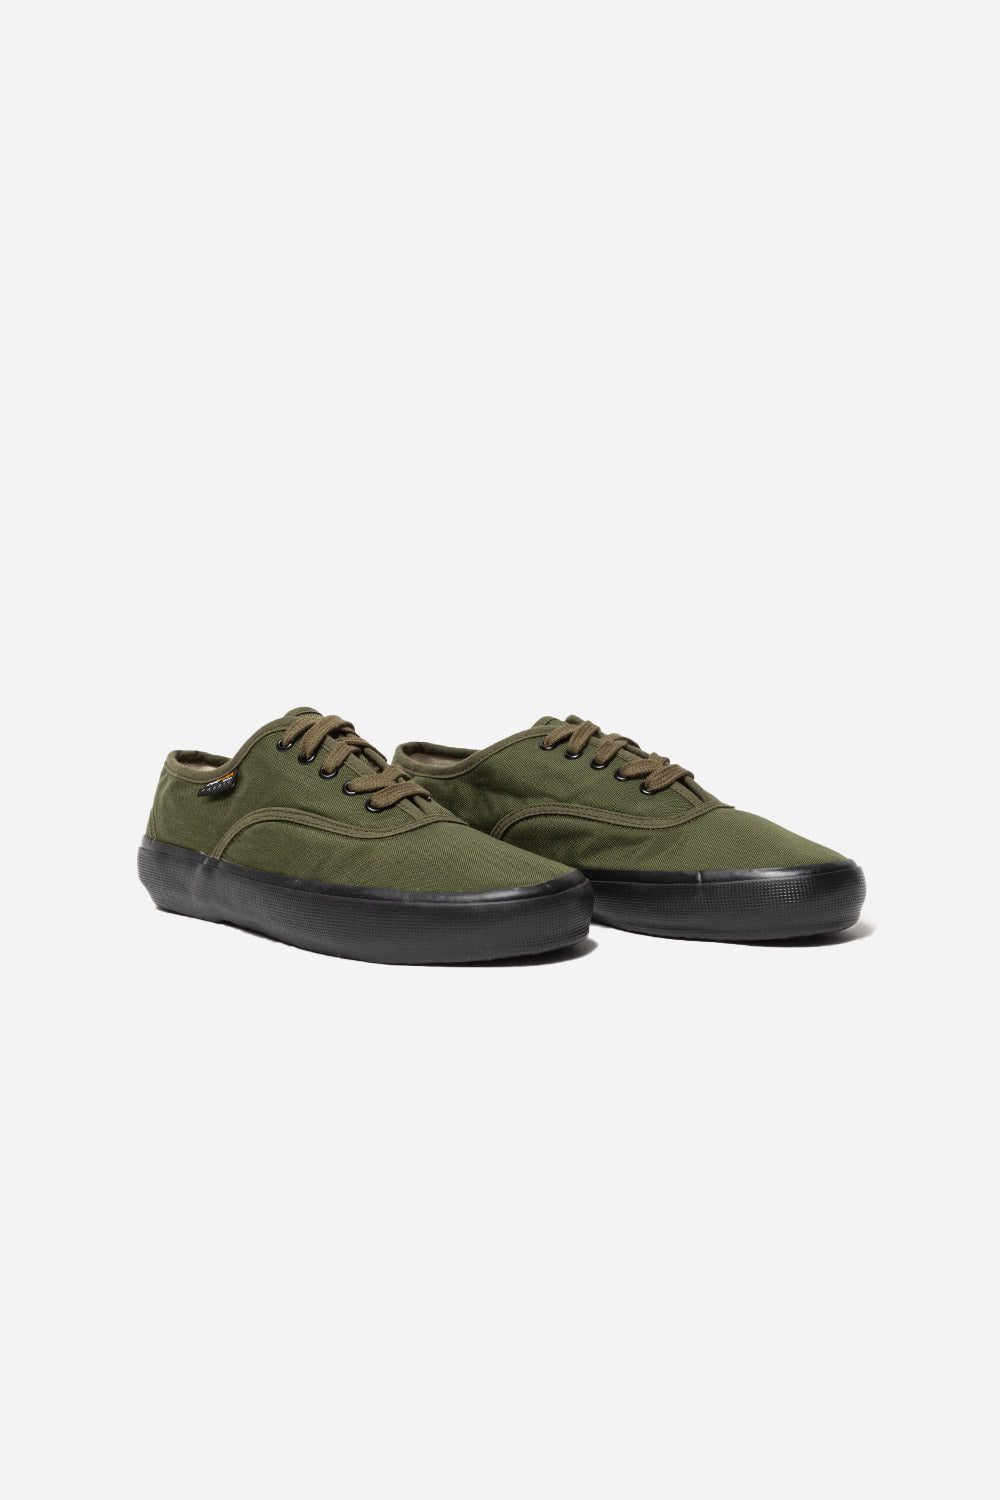 reproduction-of-found-us-navy-military-olive-black-sole